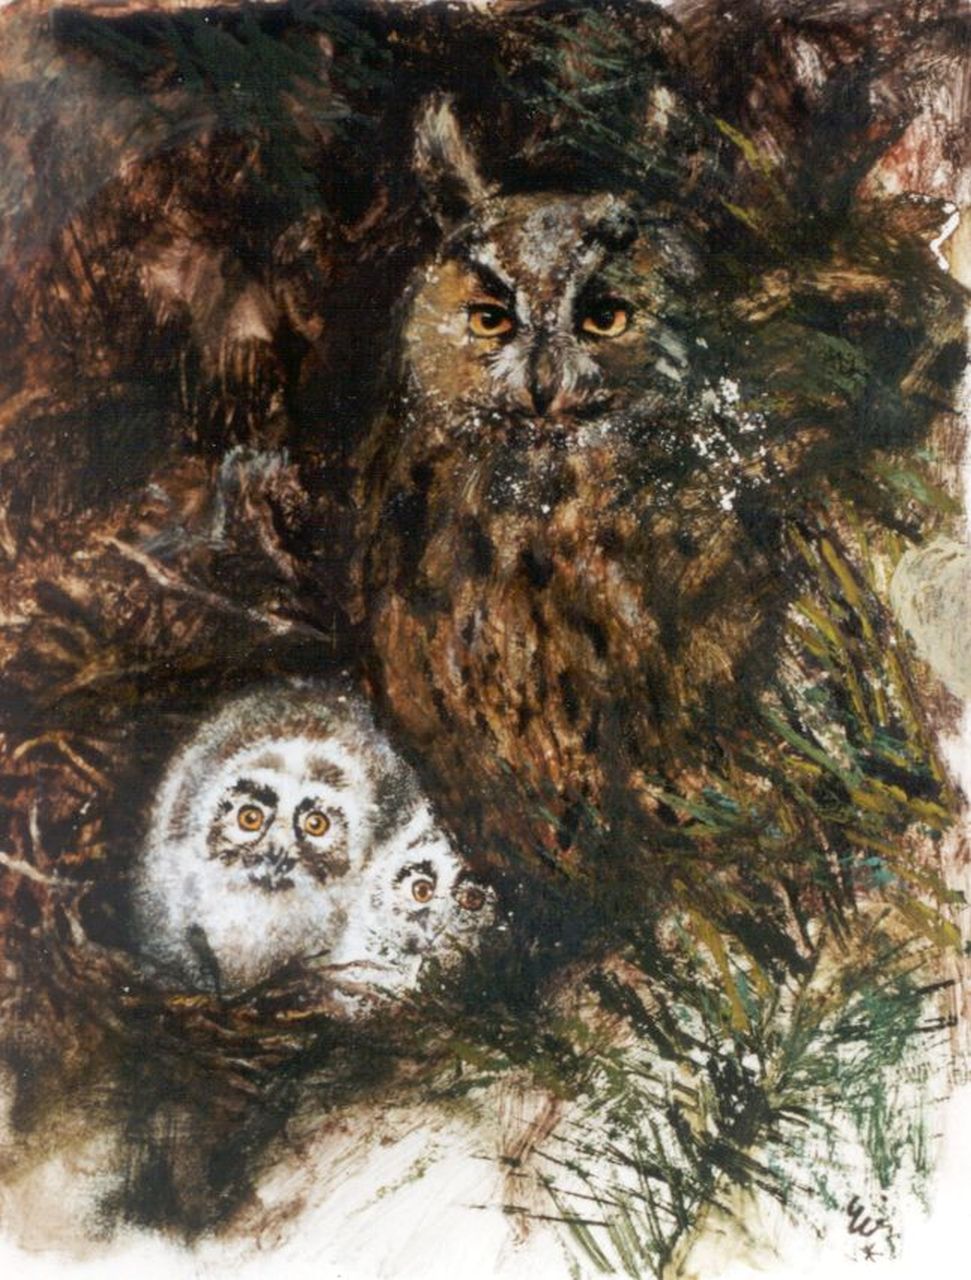 Poortvliet R.  | Rien Poortvliet, The owl, watercolour and gouache on paper 29.9 x 24.1 cm, signed l.r.